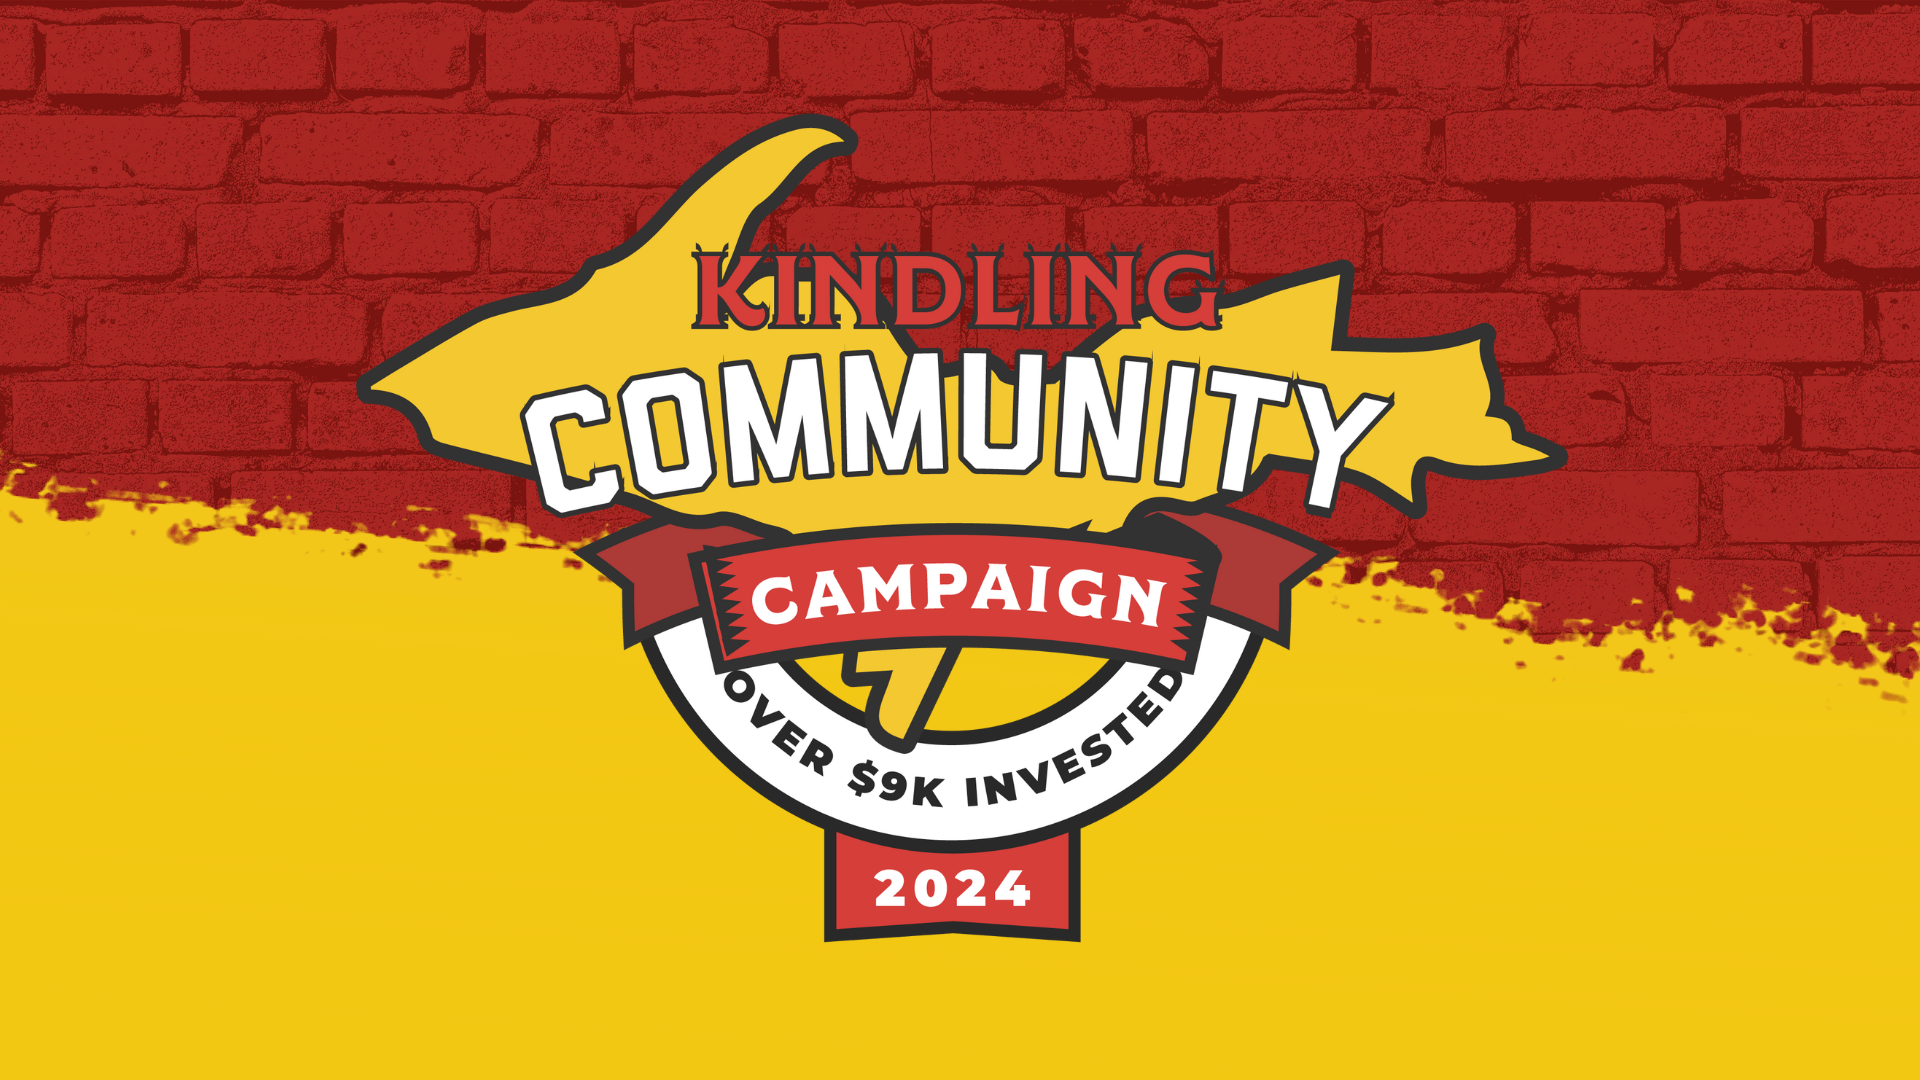 Over $9K invested back in our community through The Fire Station's Kindling Community campaign